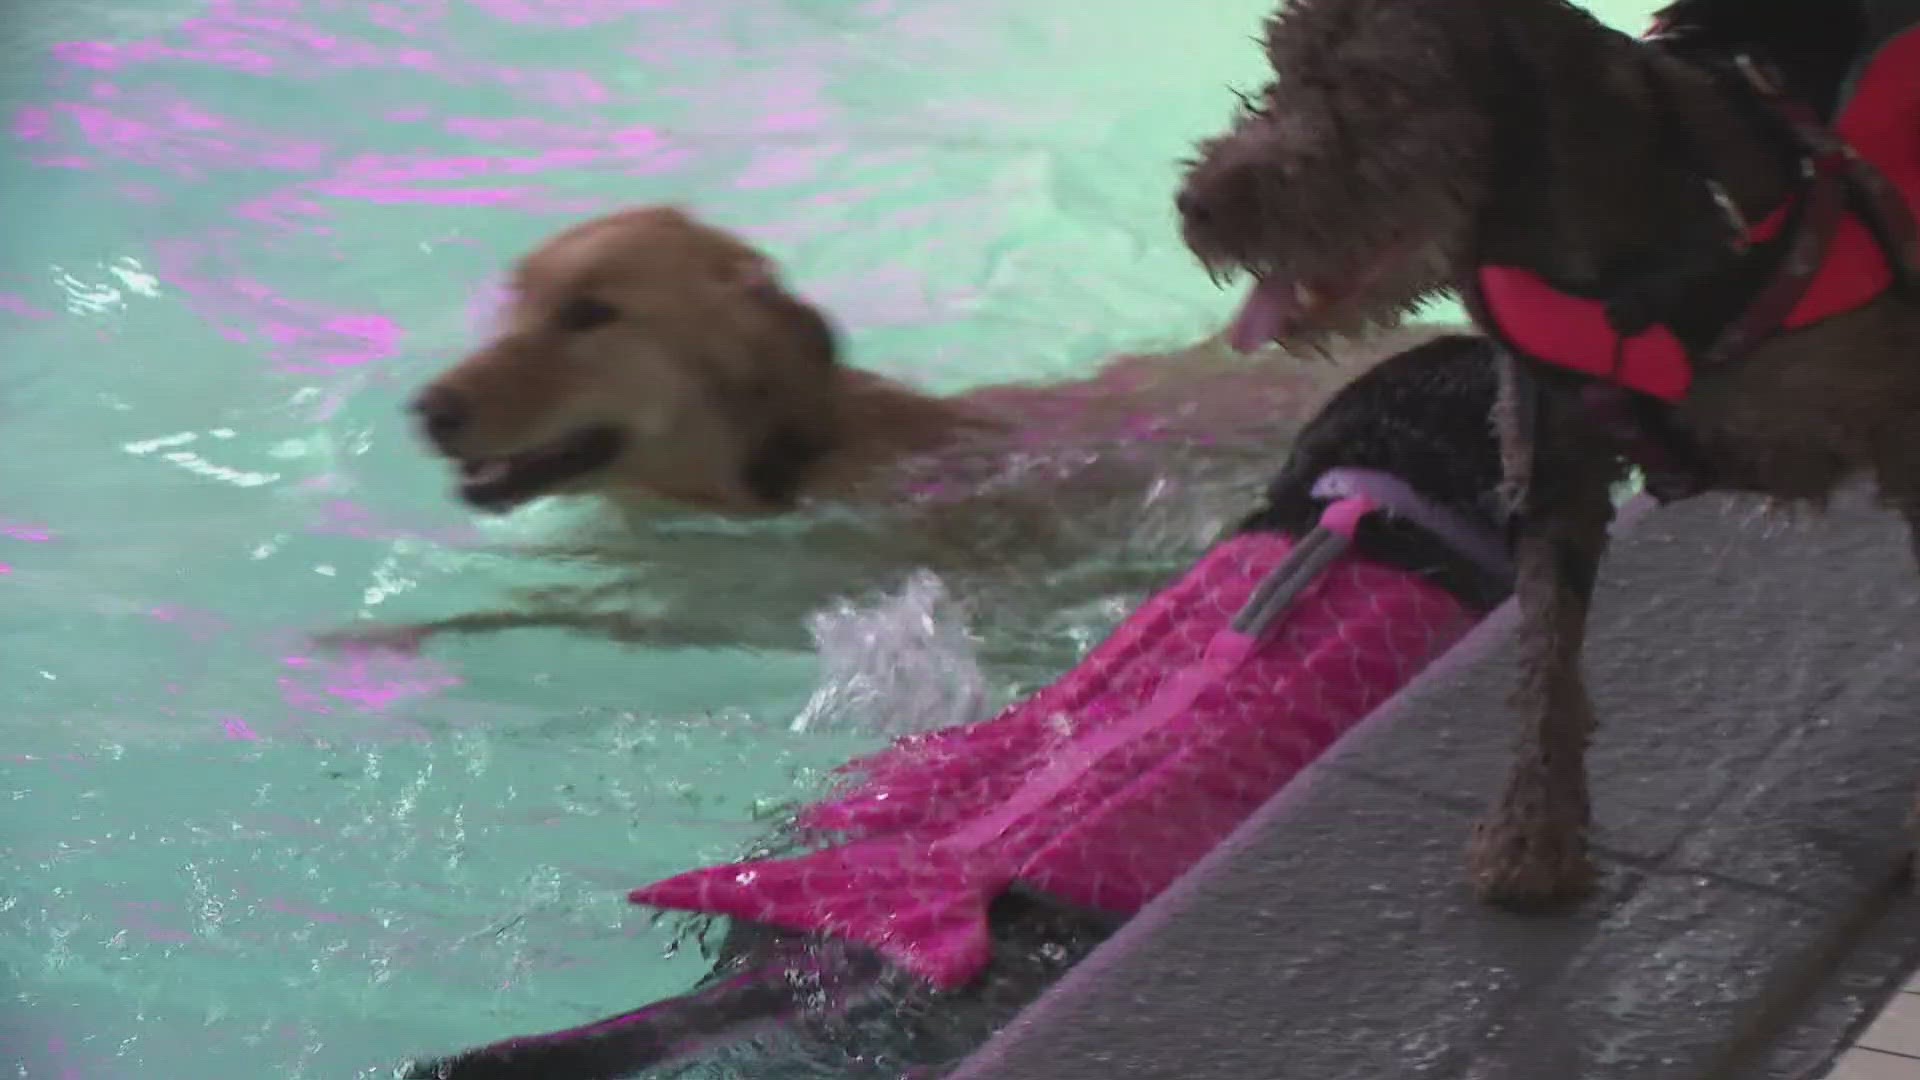 A highlight of the once-a-year celebration included a special doggie swim in the hotel's indoor pool.